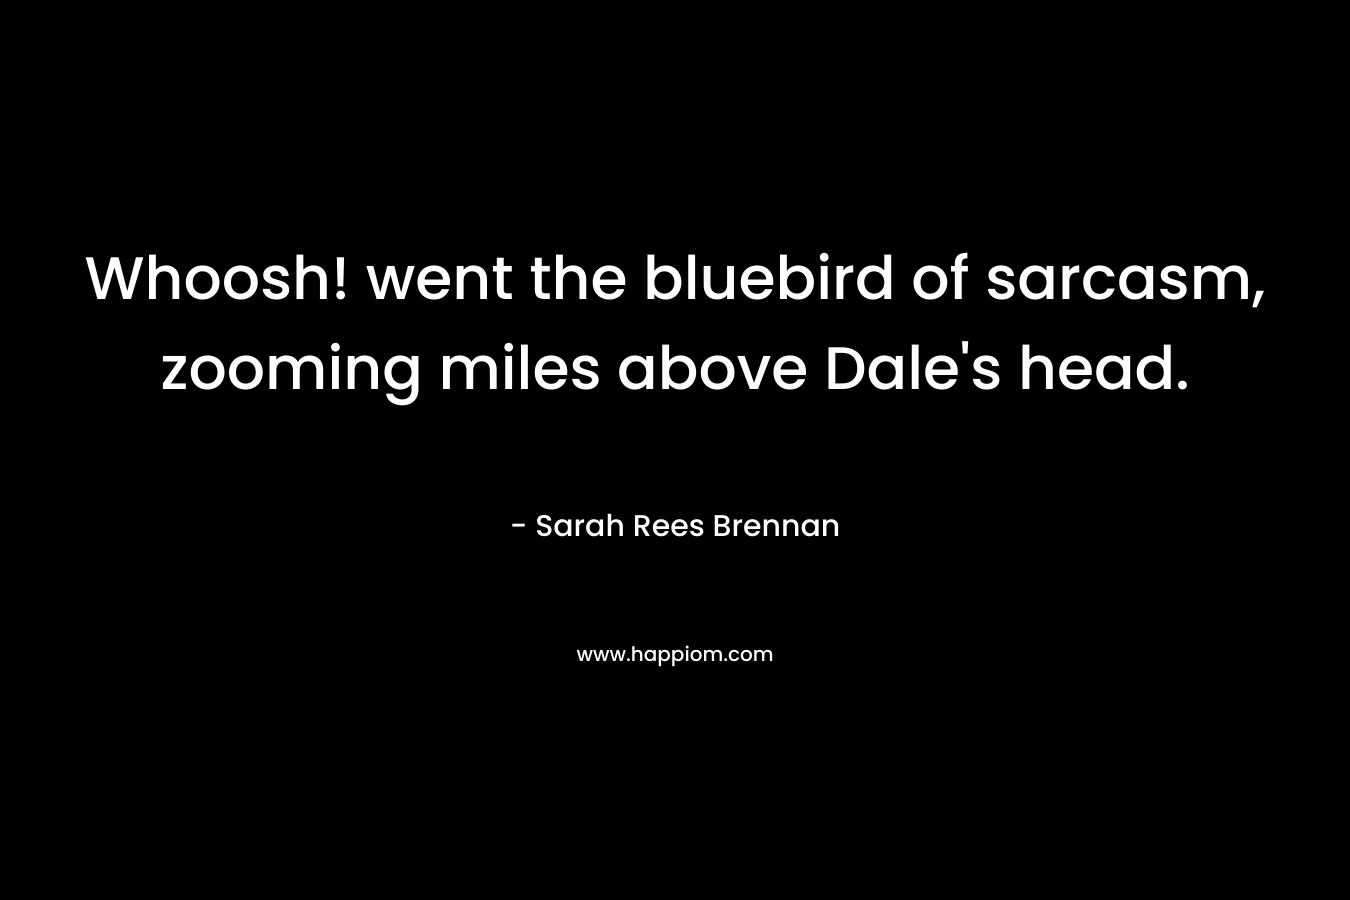 Whoosh! went the bluebird of sarcasm, zooming miles above Dale’s head. – Sarah Rees Brennan